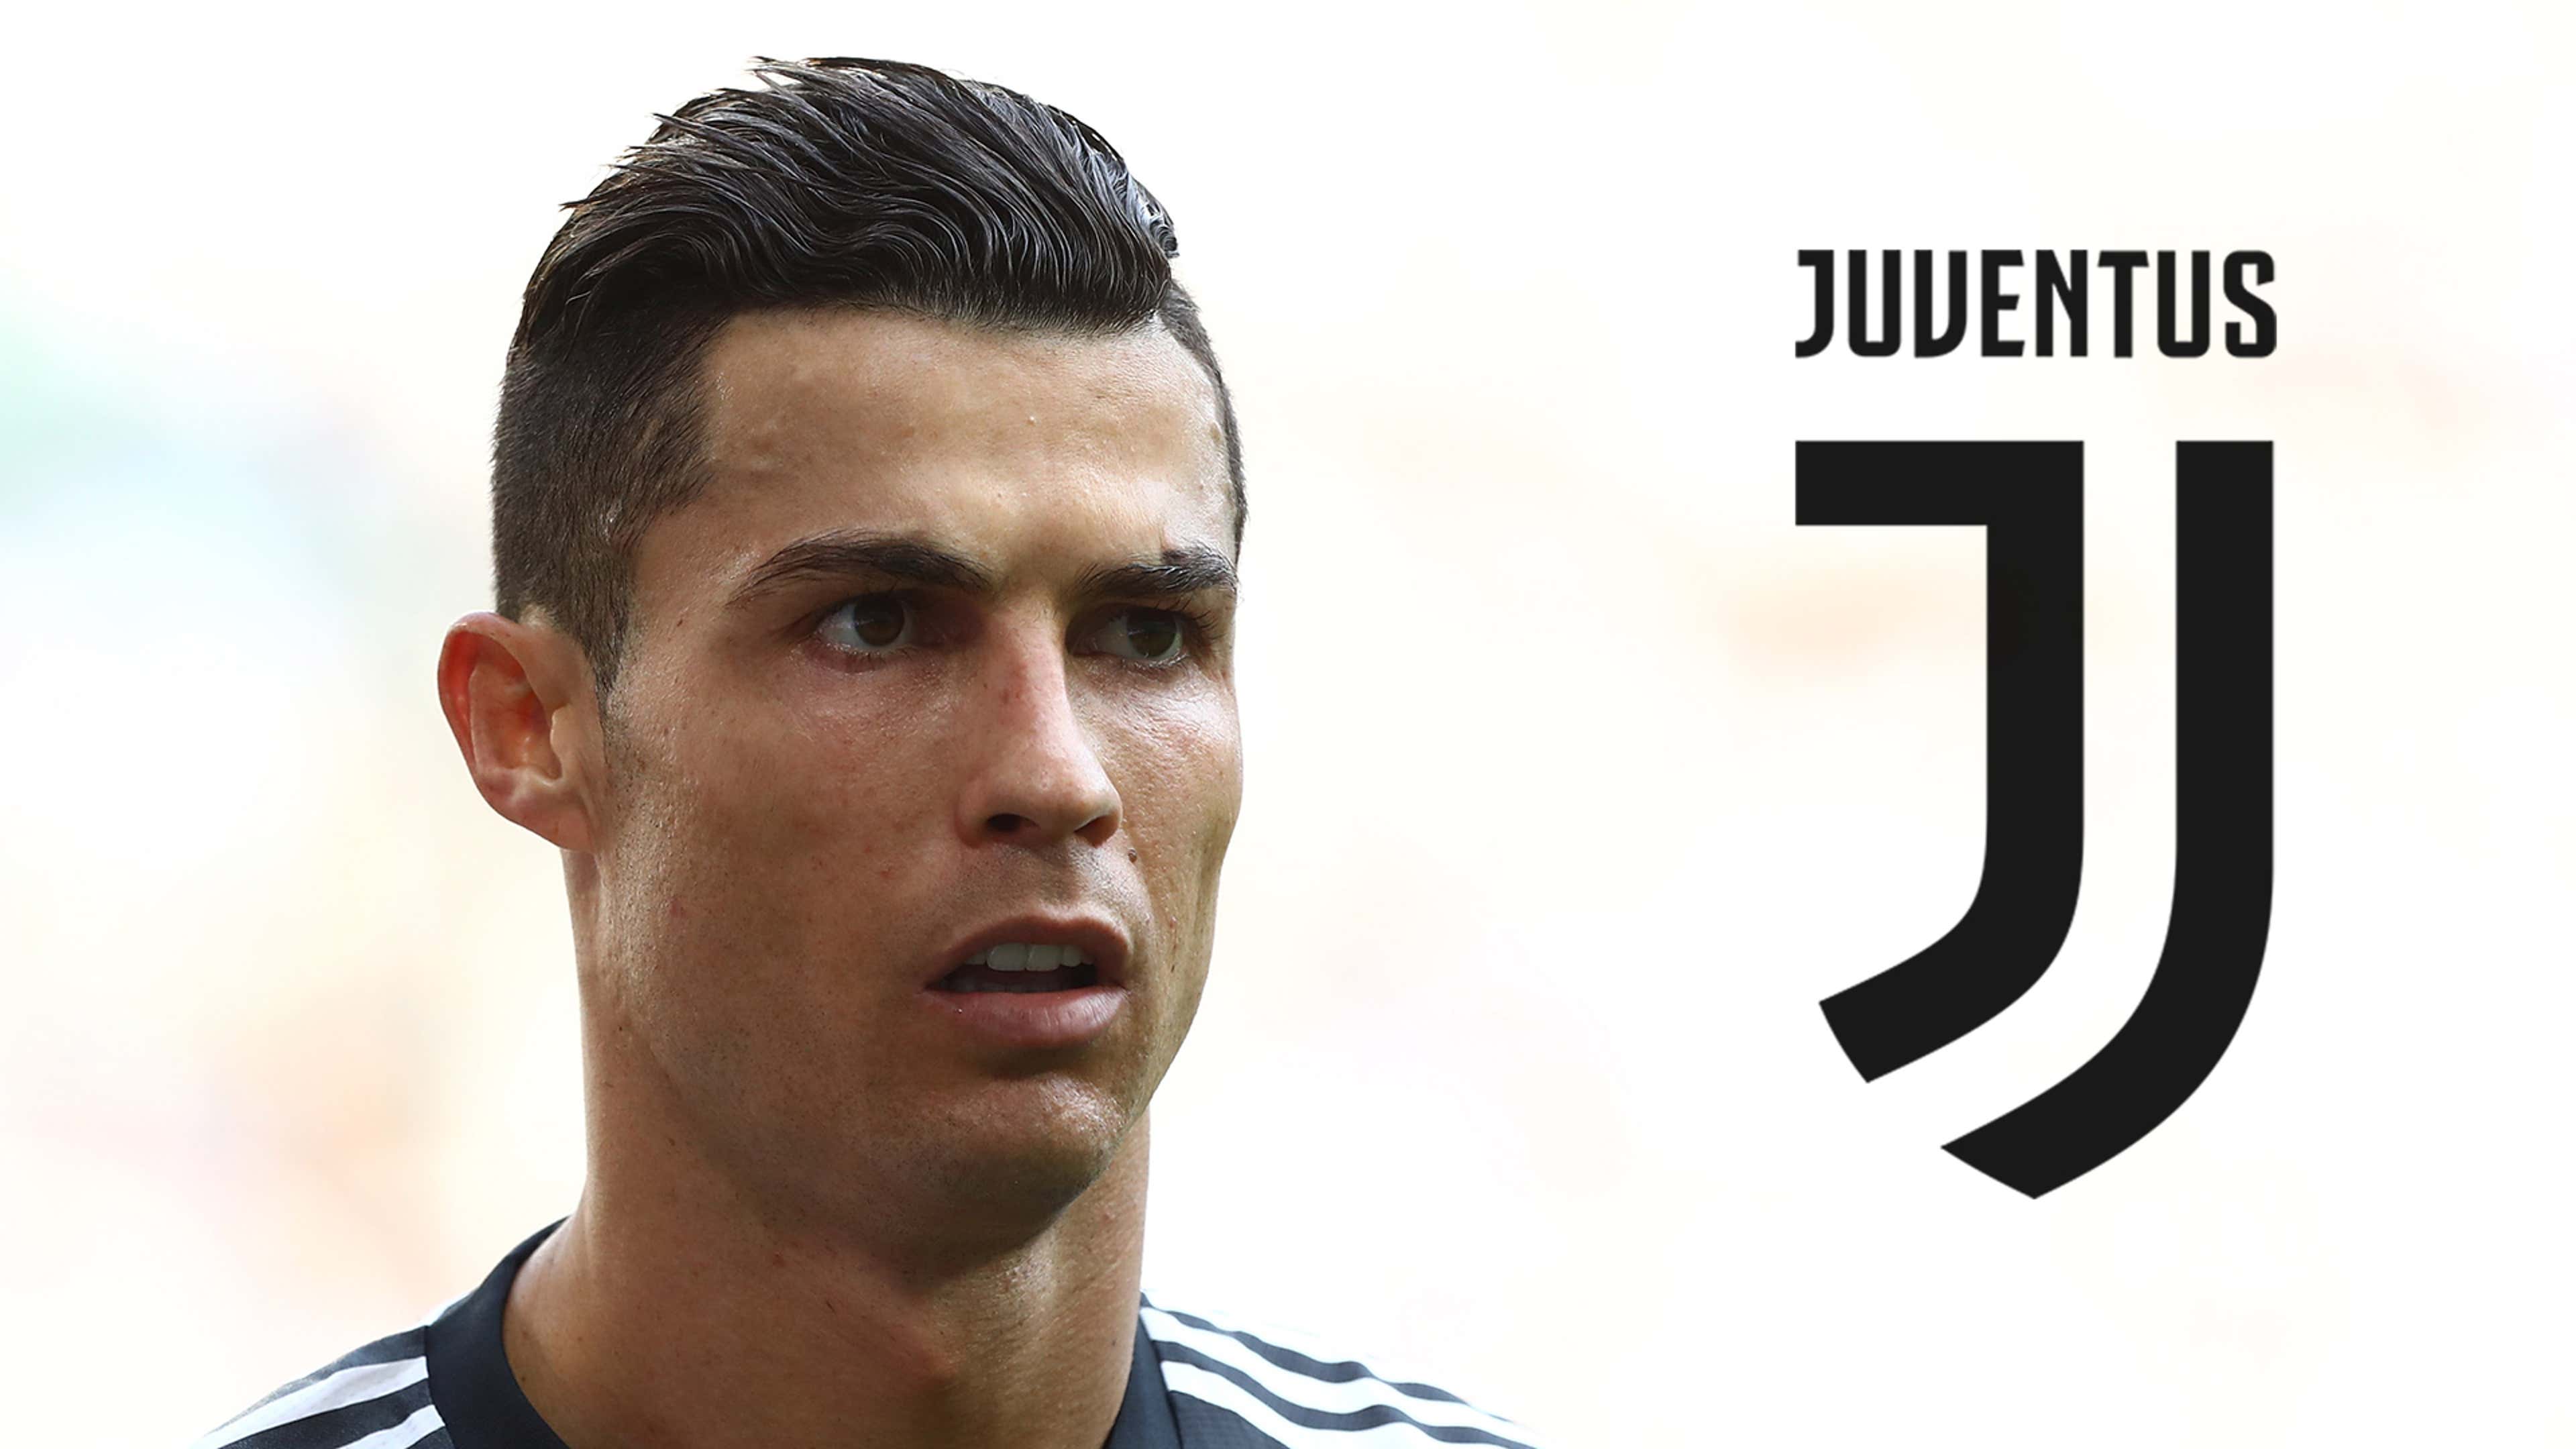 Incredible behind-the-scenes footage reveals Cristiano Ronaldo and